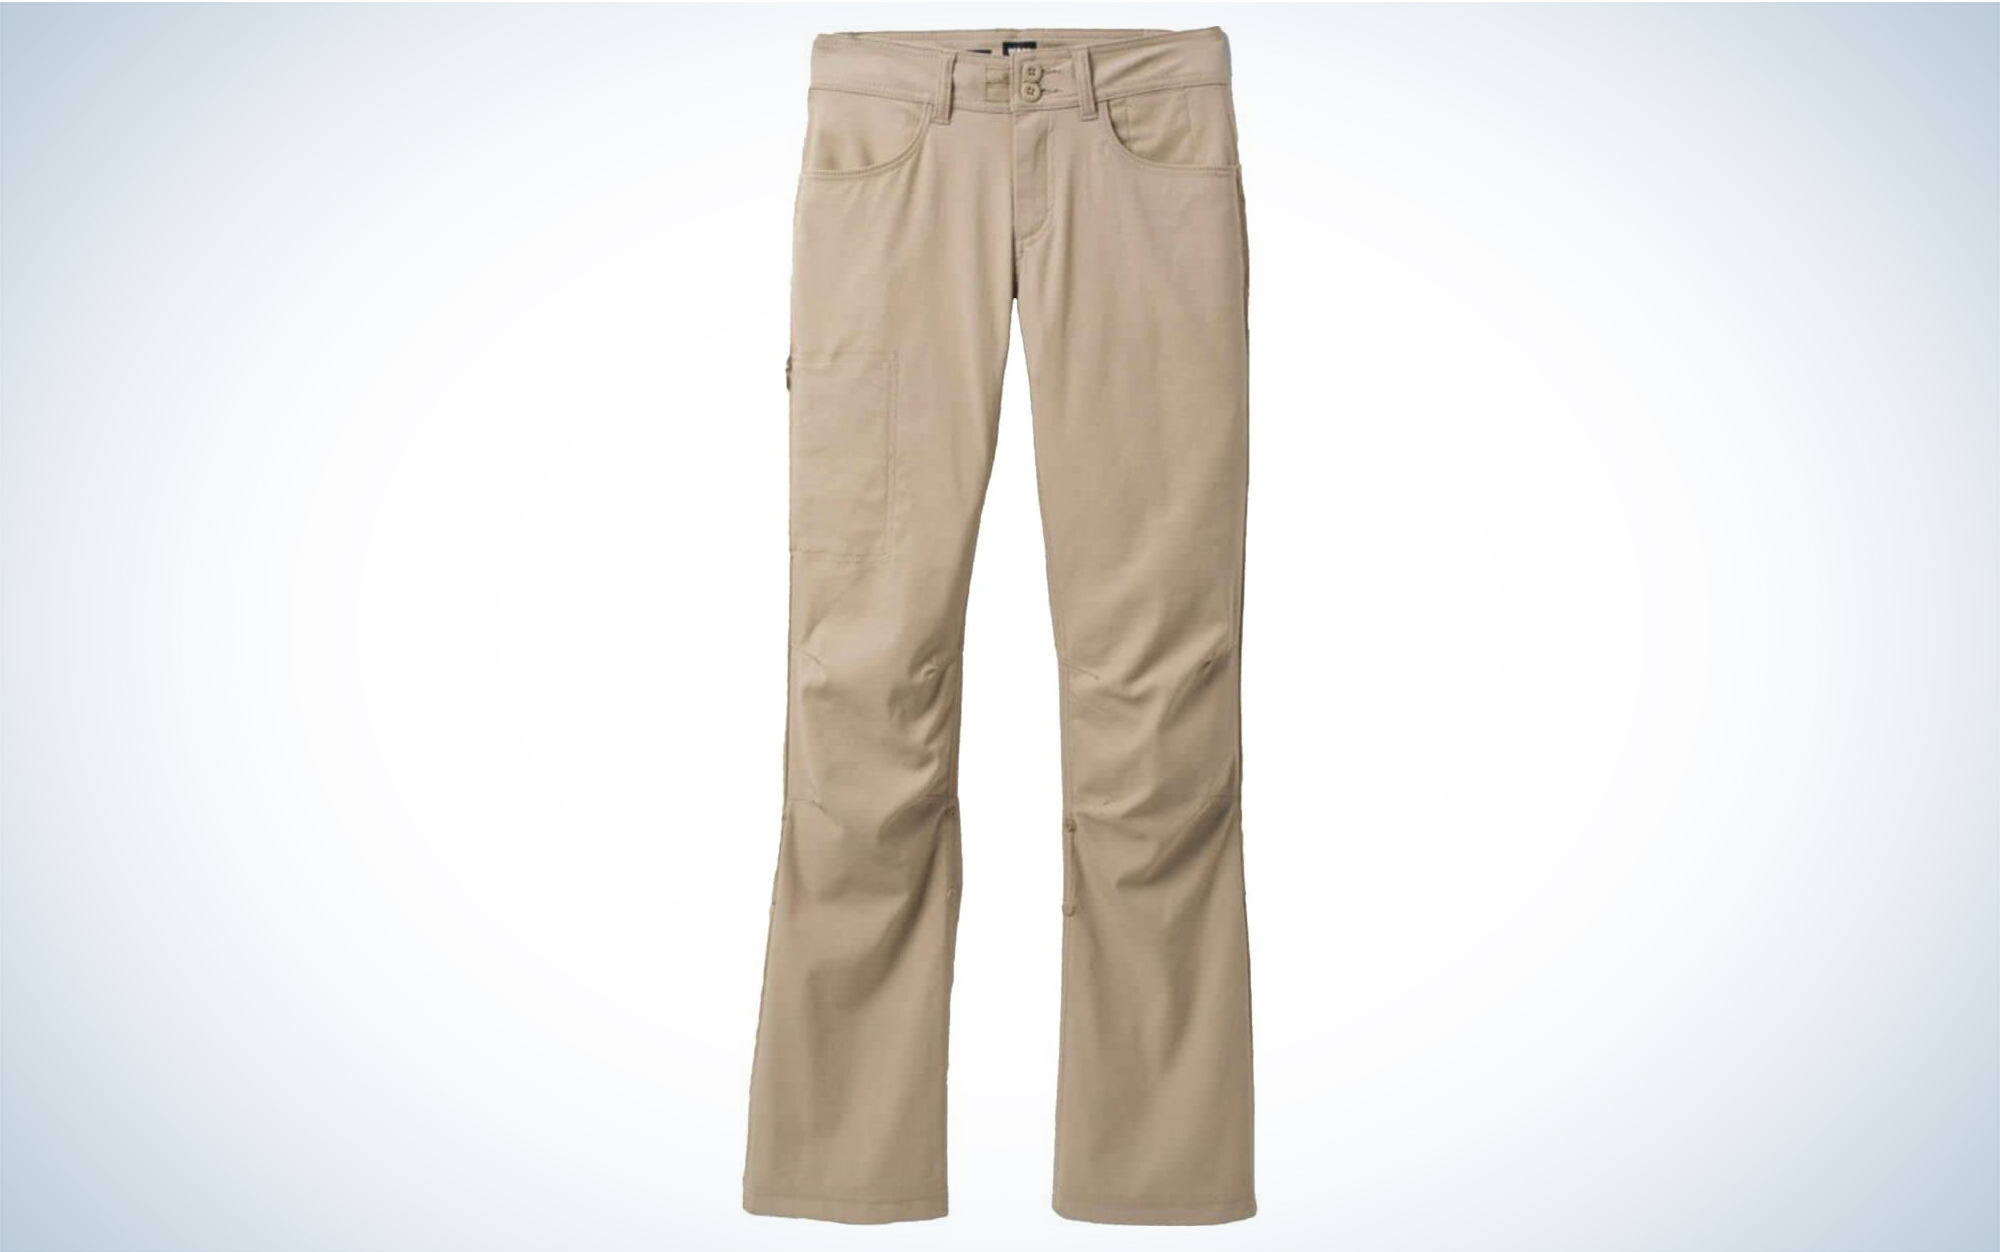 The prAna Halle II women's hunting pants are made of recycled nylon.